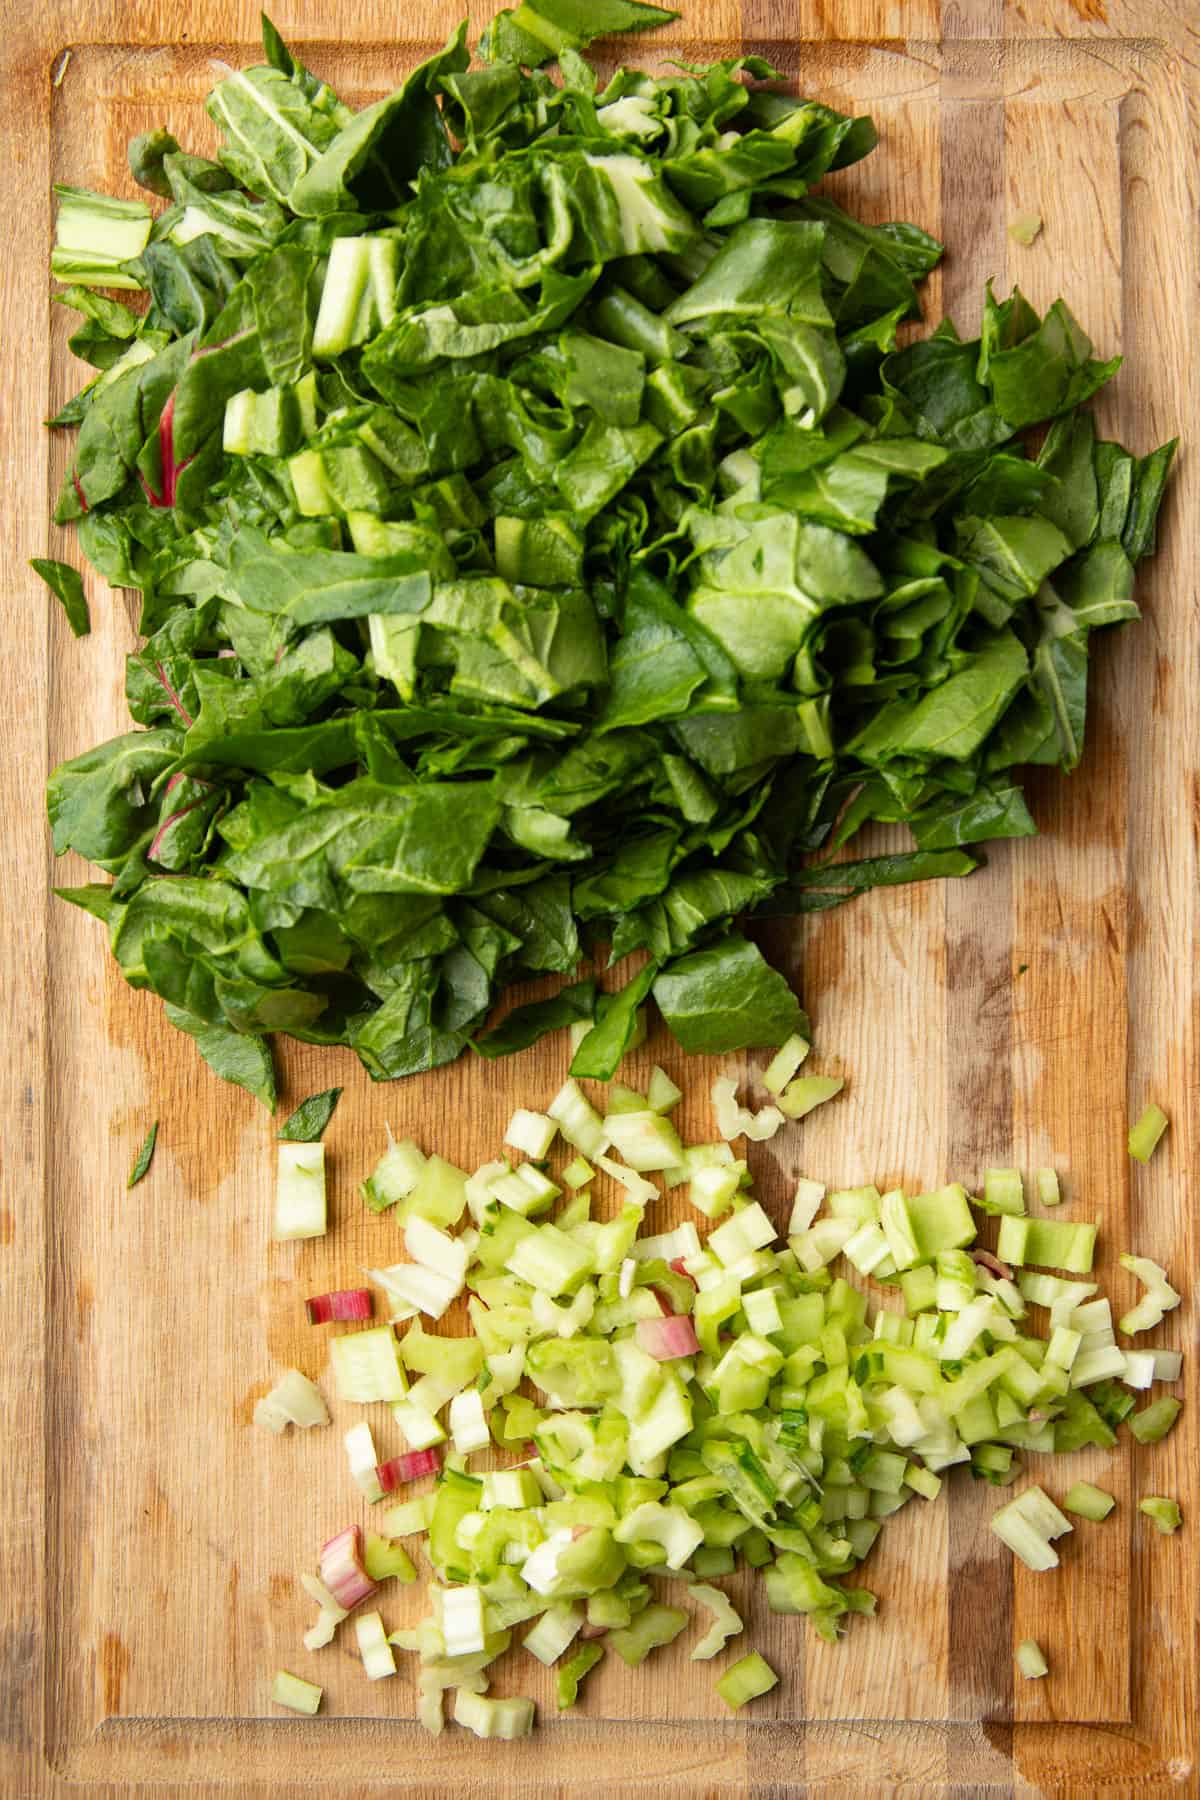 Chopped Swiss chard leaves and stems on a cutting board.